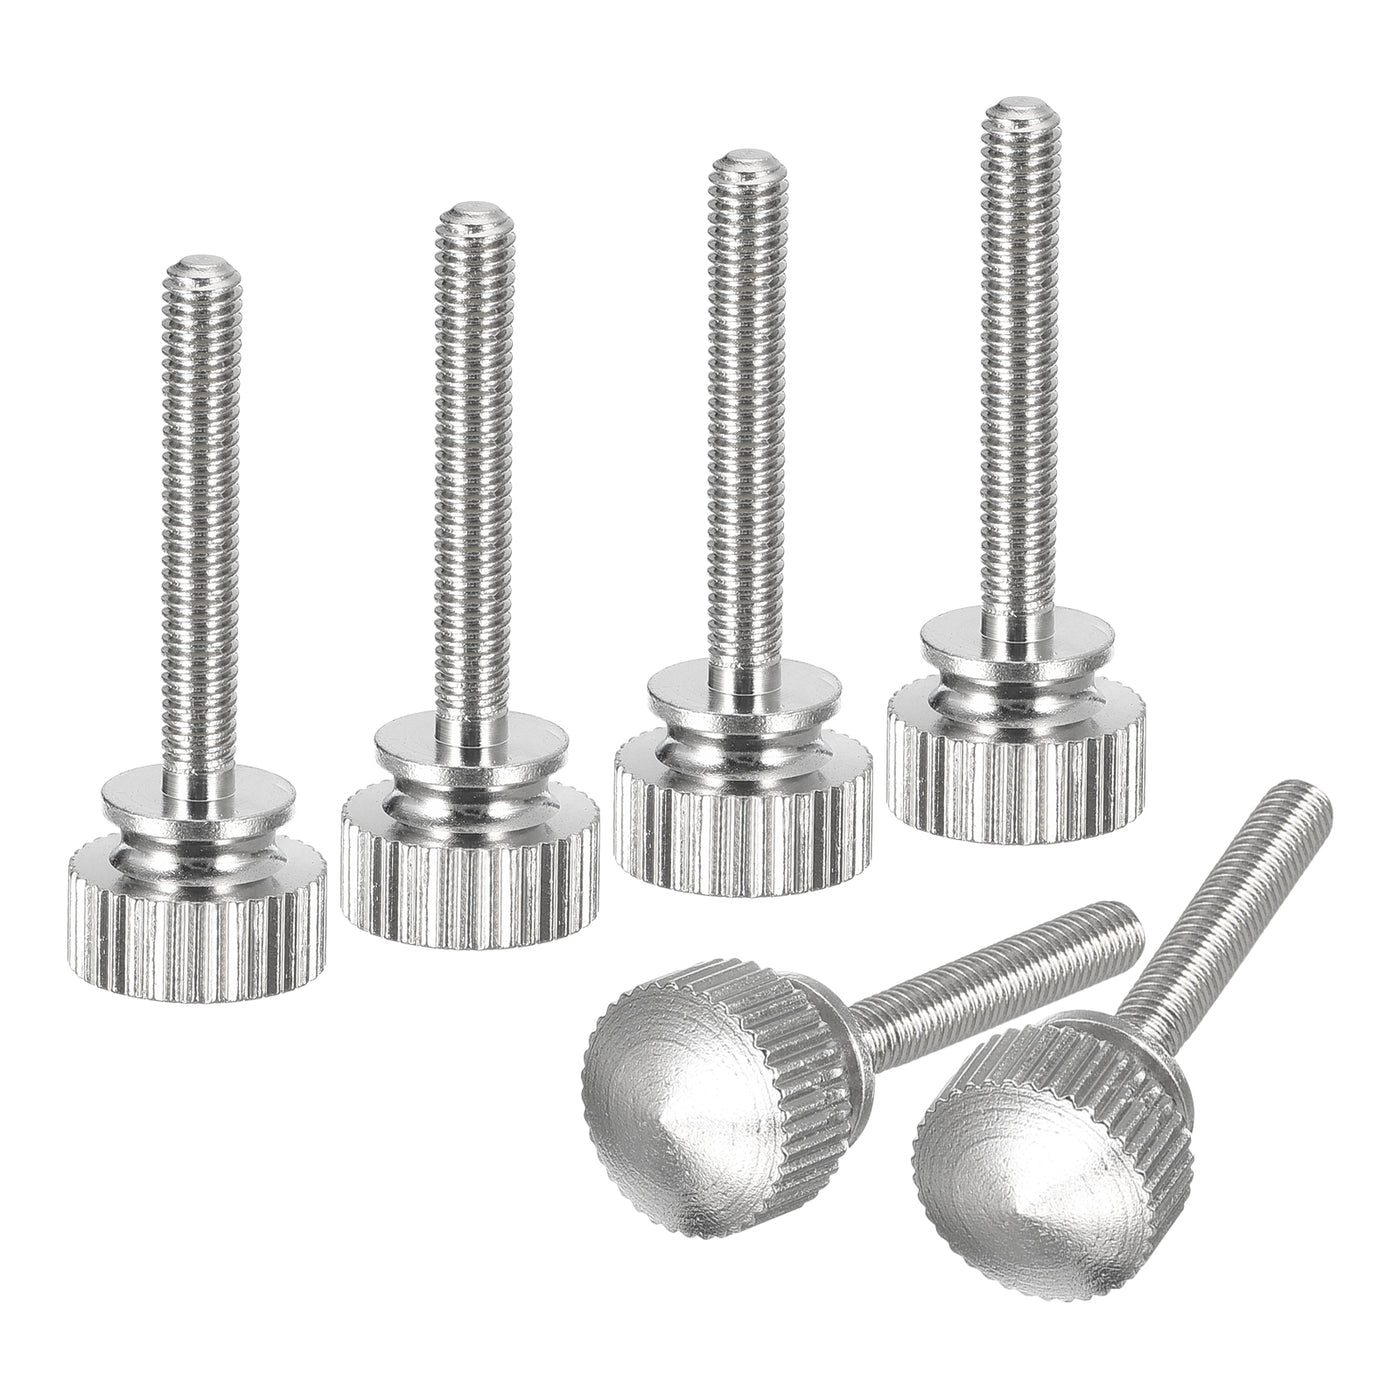 uxcell Uxcell M3x20mm Knurled Thumb Screws, 6pcs Brass Thumb Screws with Shoulder, Silver Tone